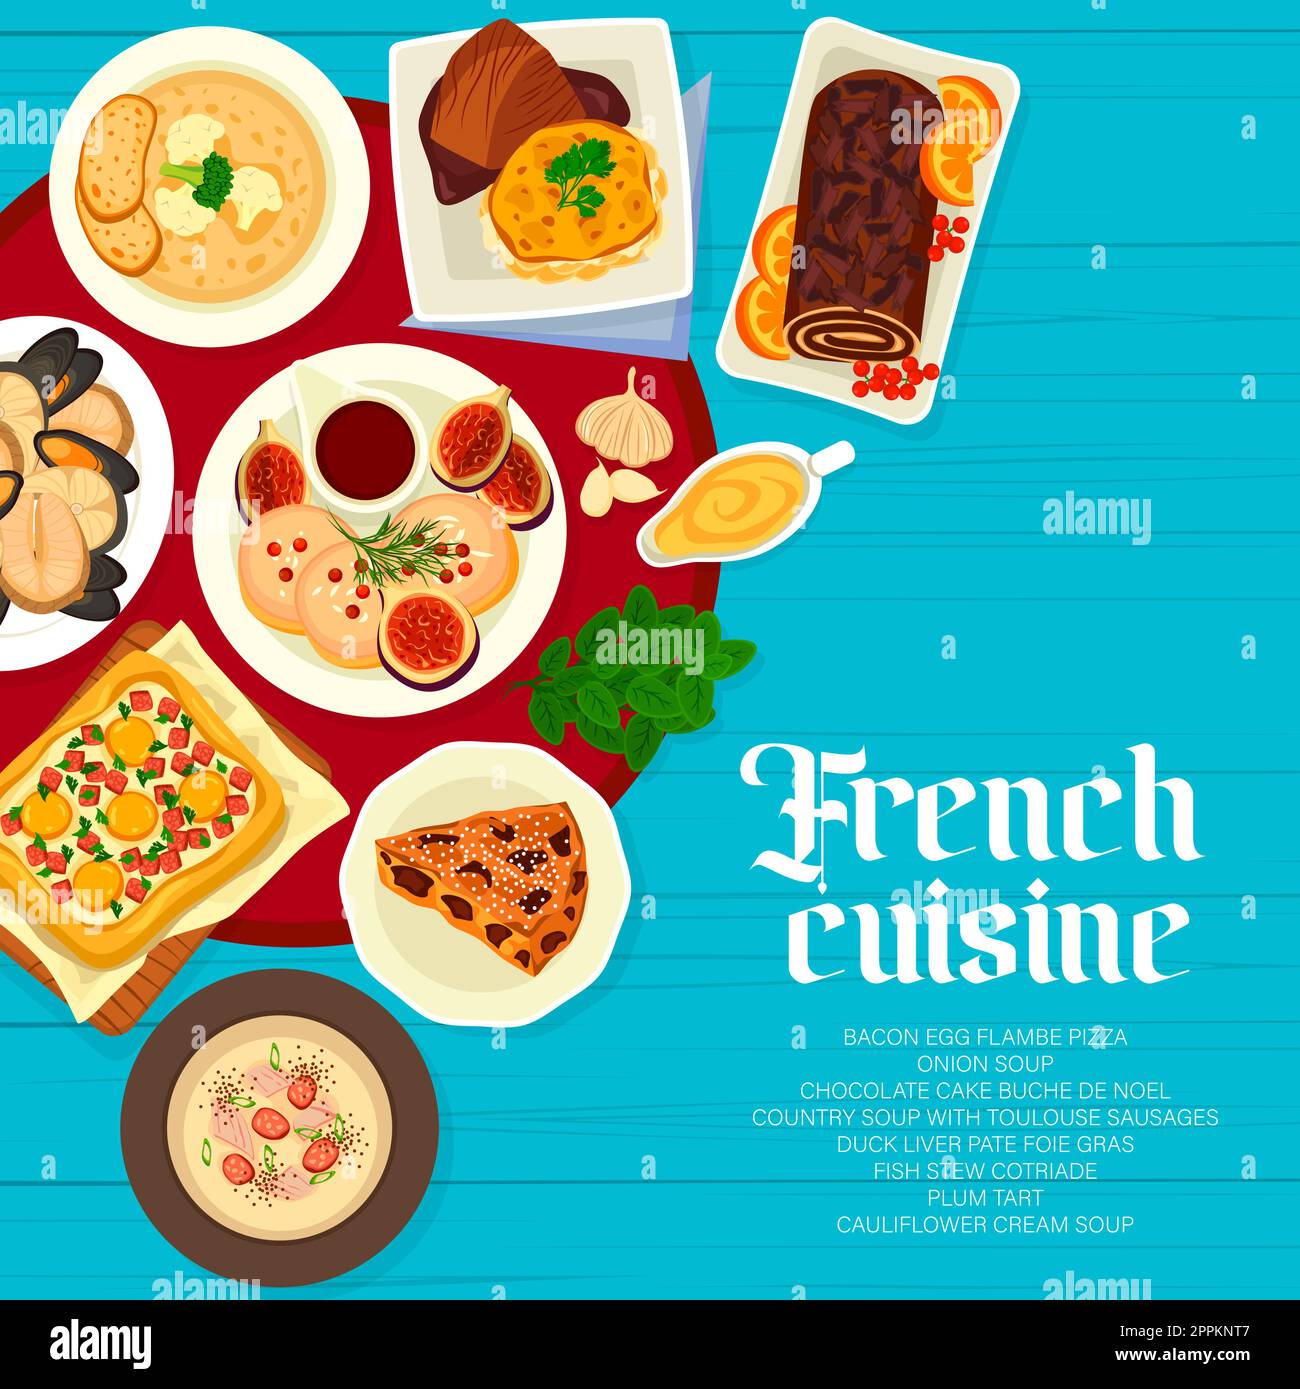 French cuisine menu cover, food dishes of France and restaurant meals, vector poster. French cuisine or Paris gourmet foie gras duck liver and soup wi Stock Vector